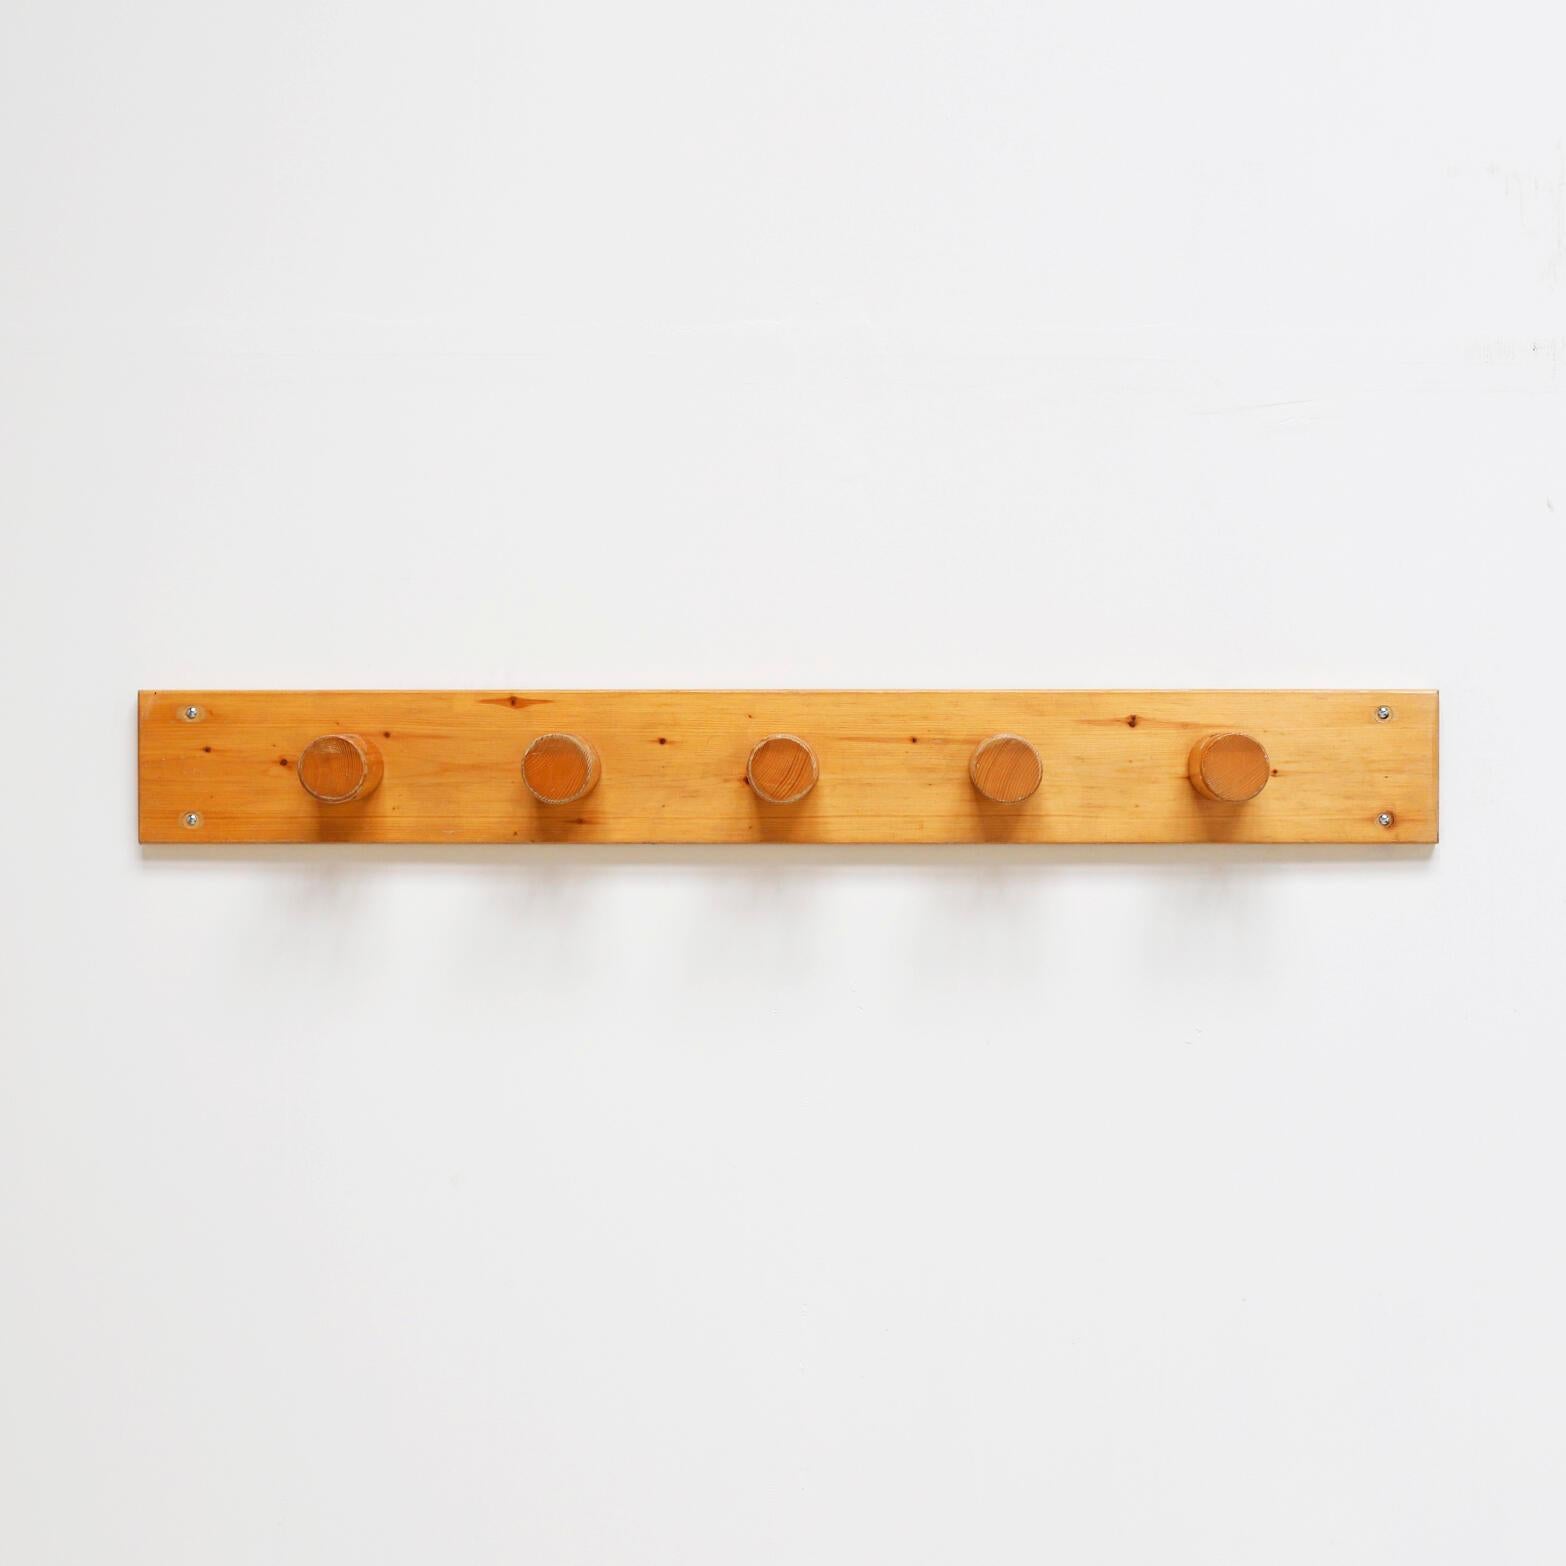 A coat rack with five hooks designed by Charlotte Perriand for Les Arcs ski resort in France. Made in 1970s. Pine solid wood. 
It's in excellent vintage condition with minor wear consistent with age and use.